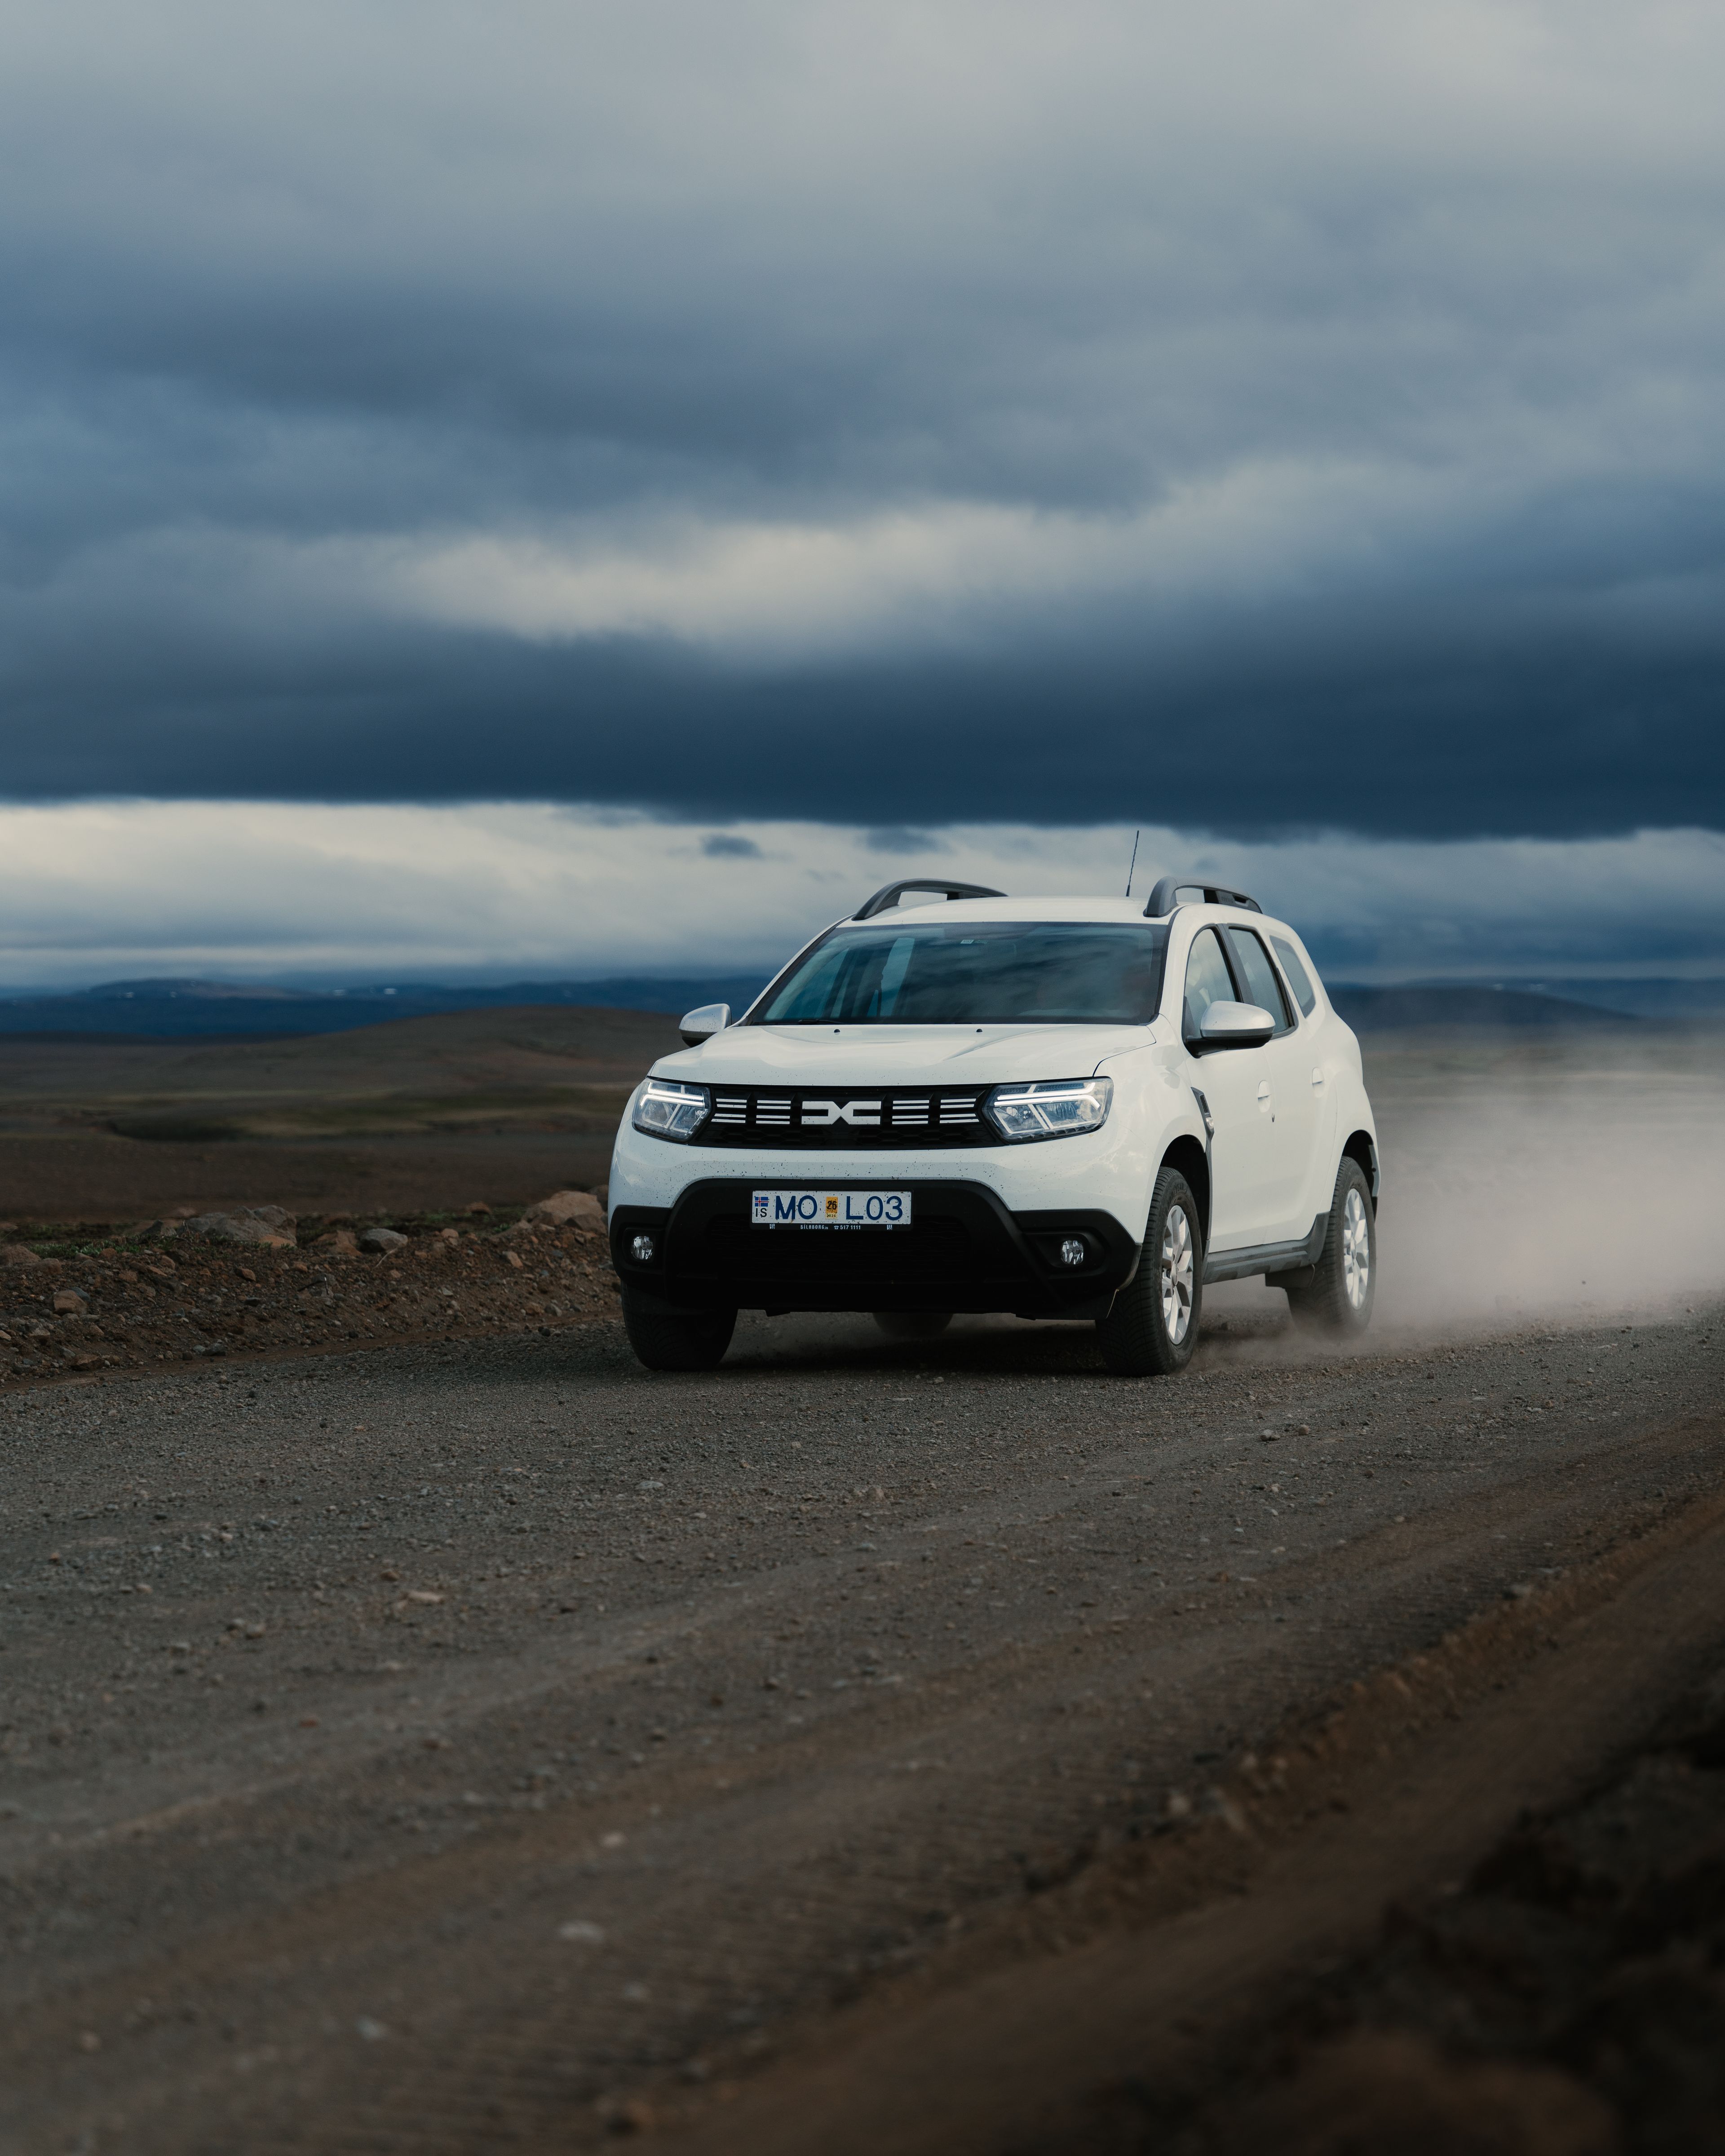 Dacia Duster rental car driving on gravel road in iceland